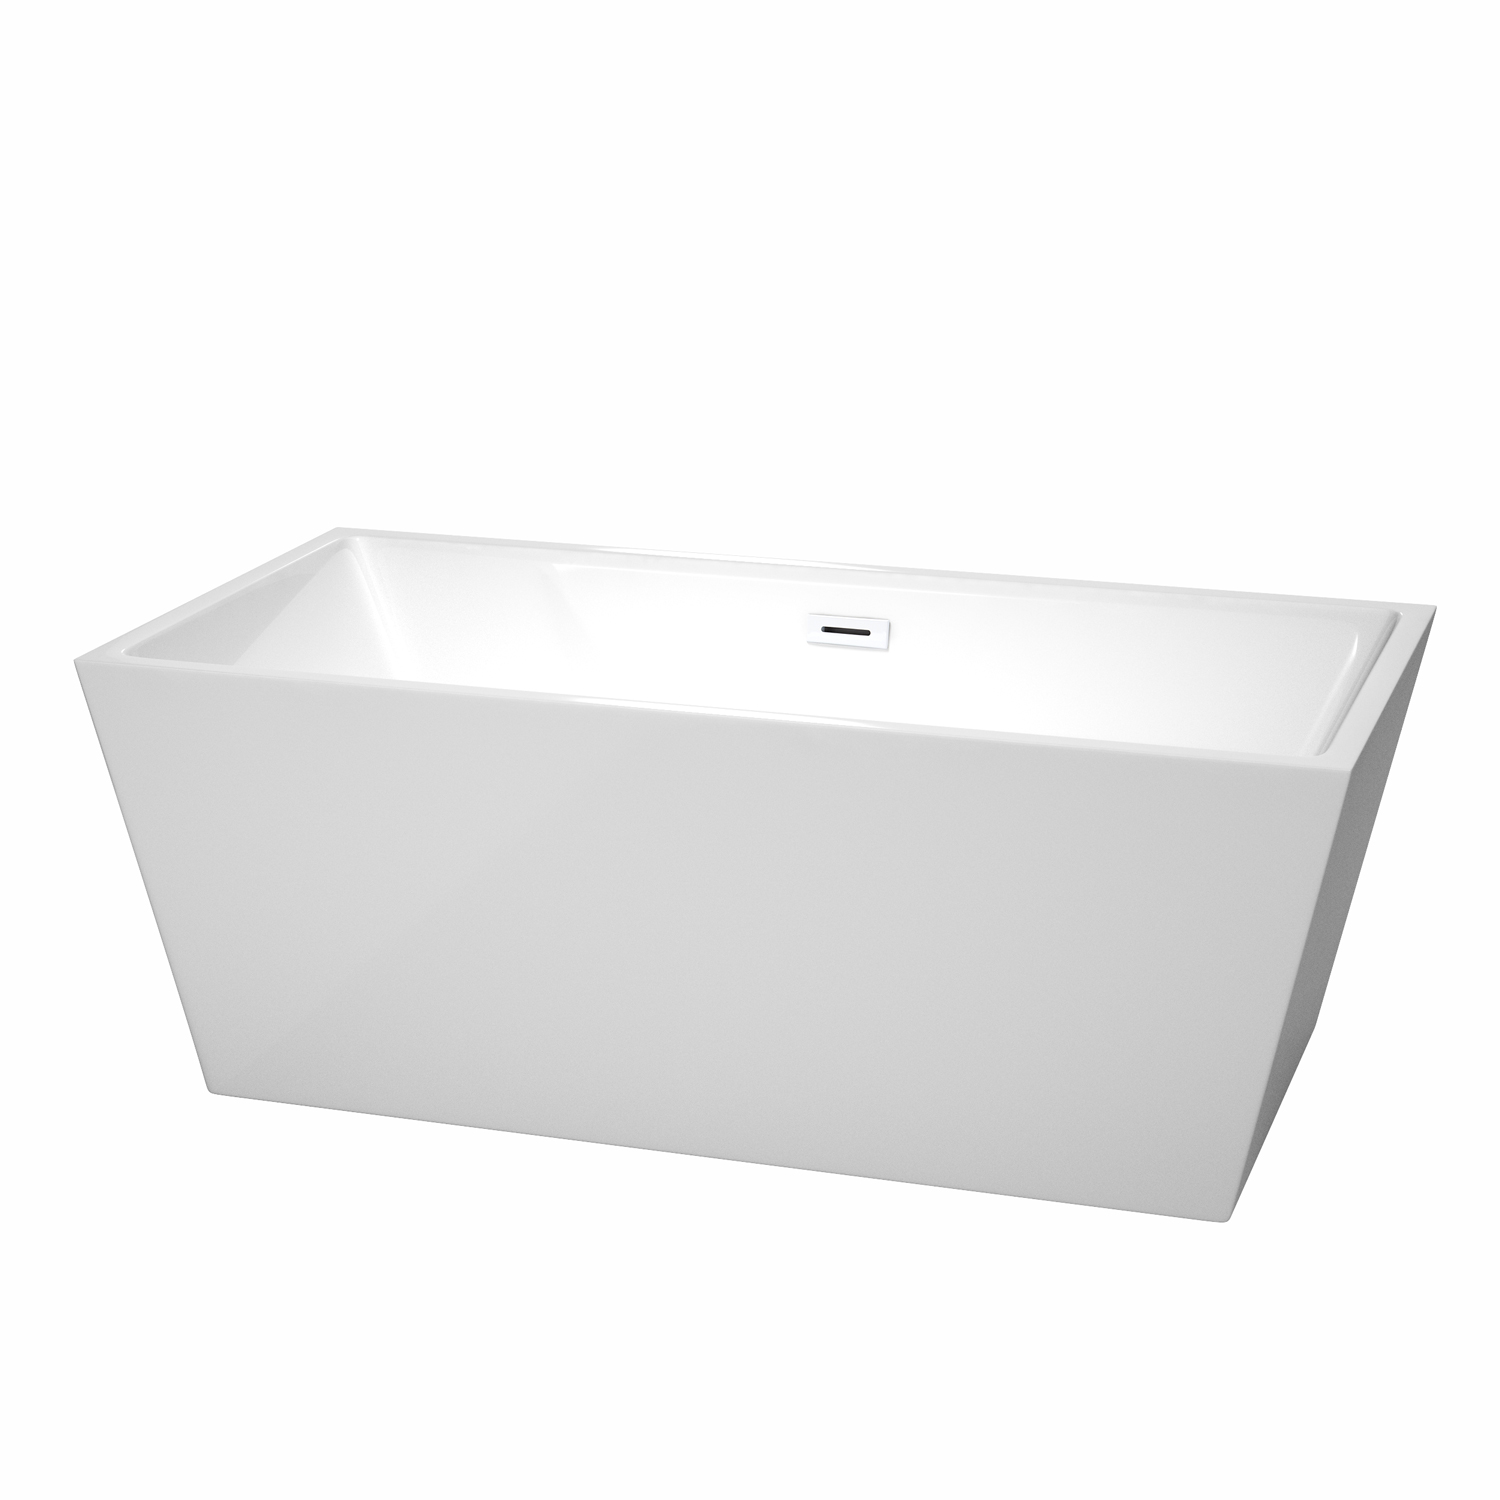 63" Freestanding Bathtub in White with Shiny White Drain and Overflow Trim